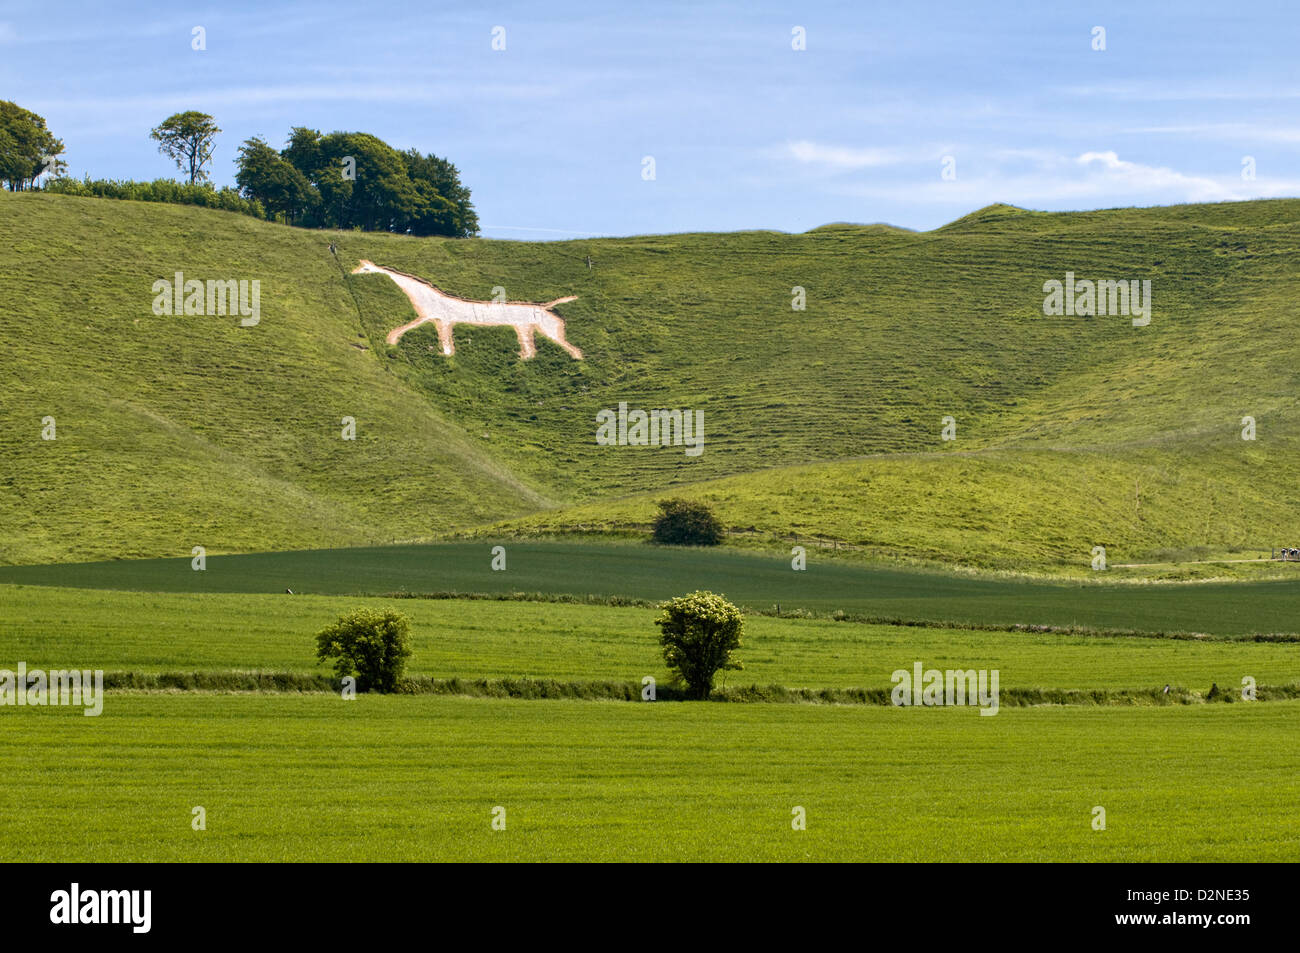 Cherhill white horse which is one of the famous white chalk horses of Wiltshire taken at Cherhill near Calne, Wiltshire Stock Photo